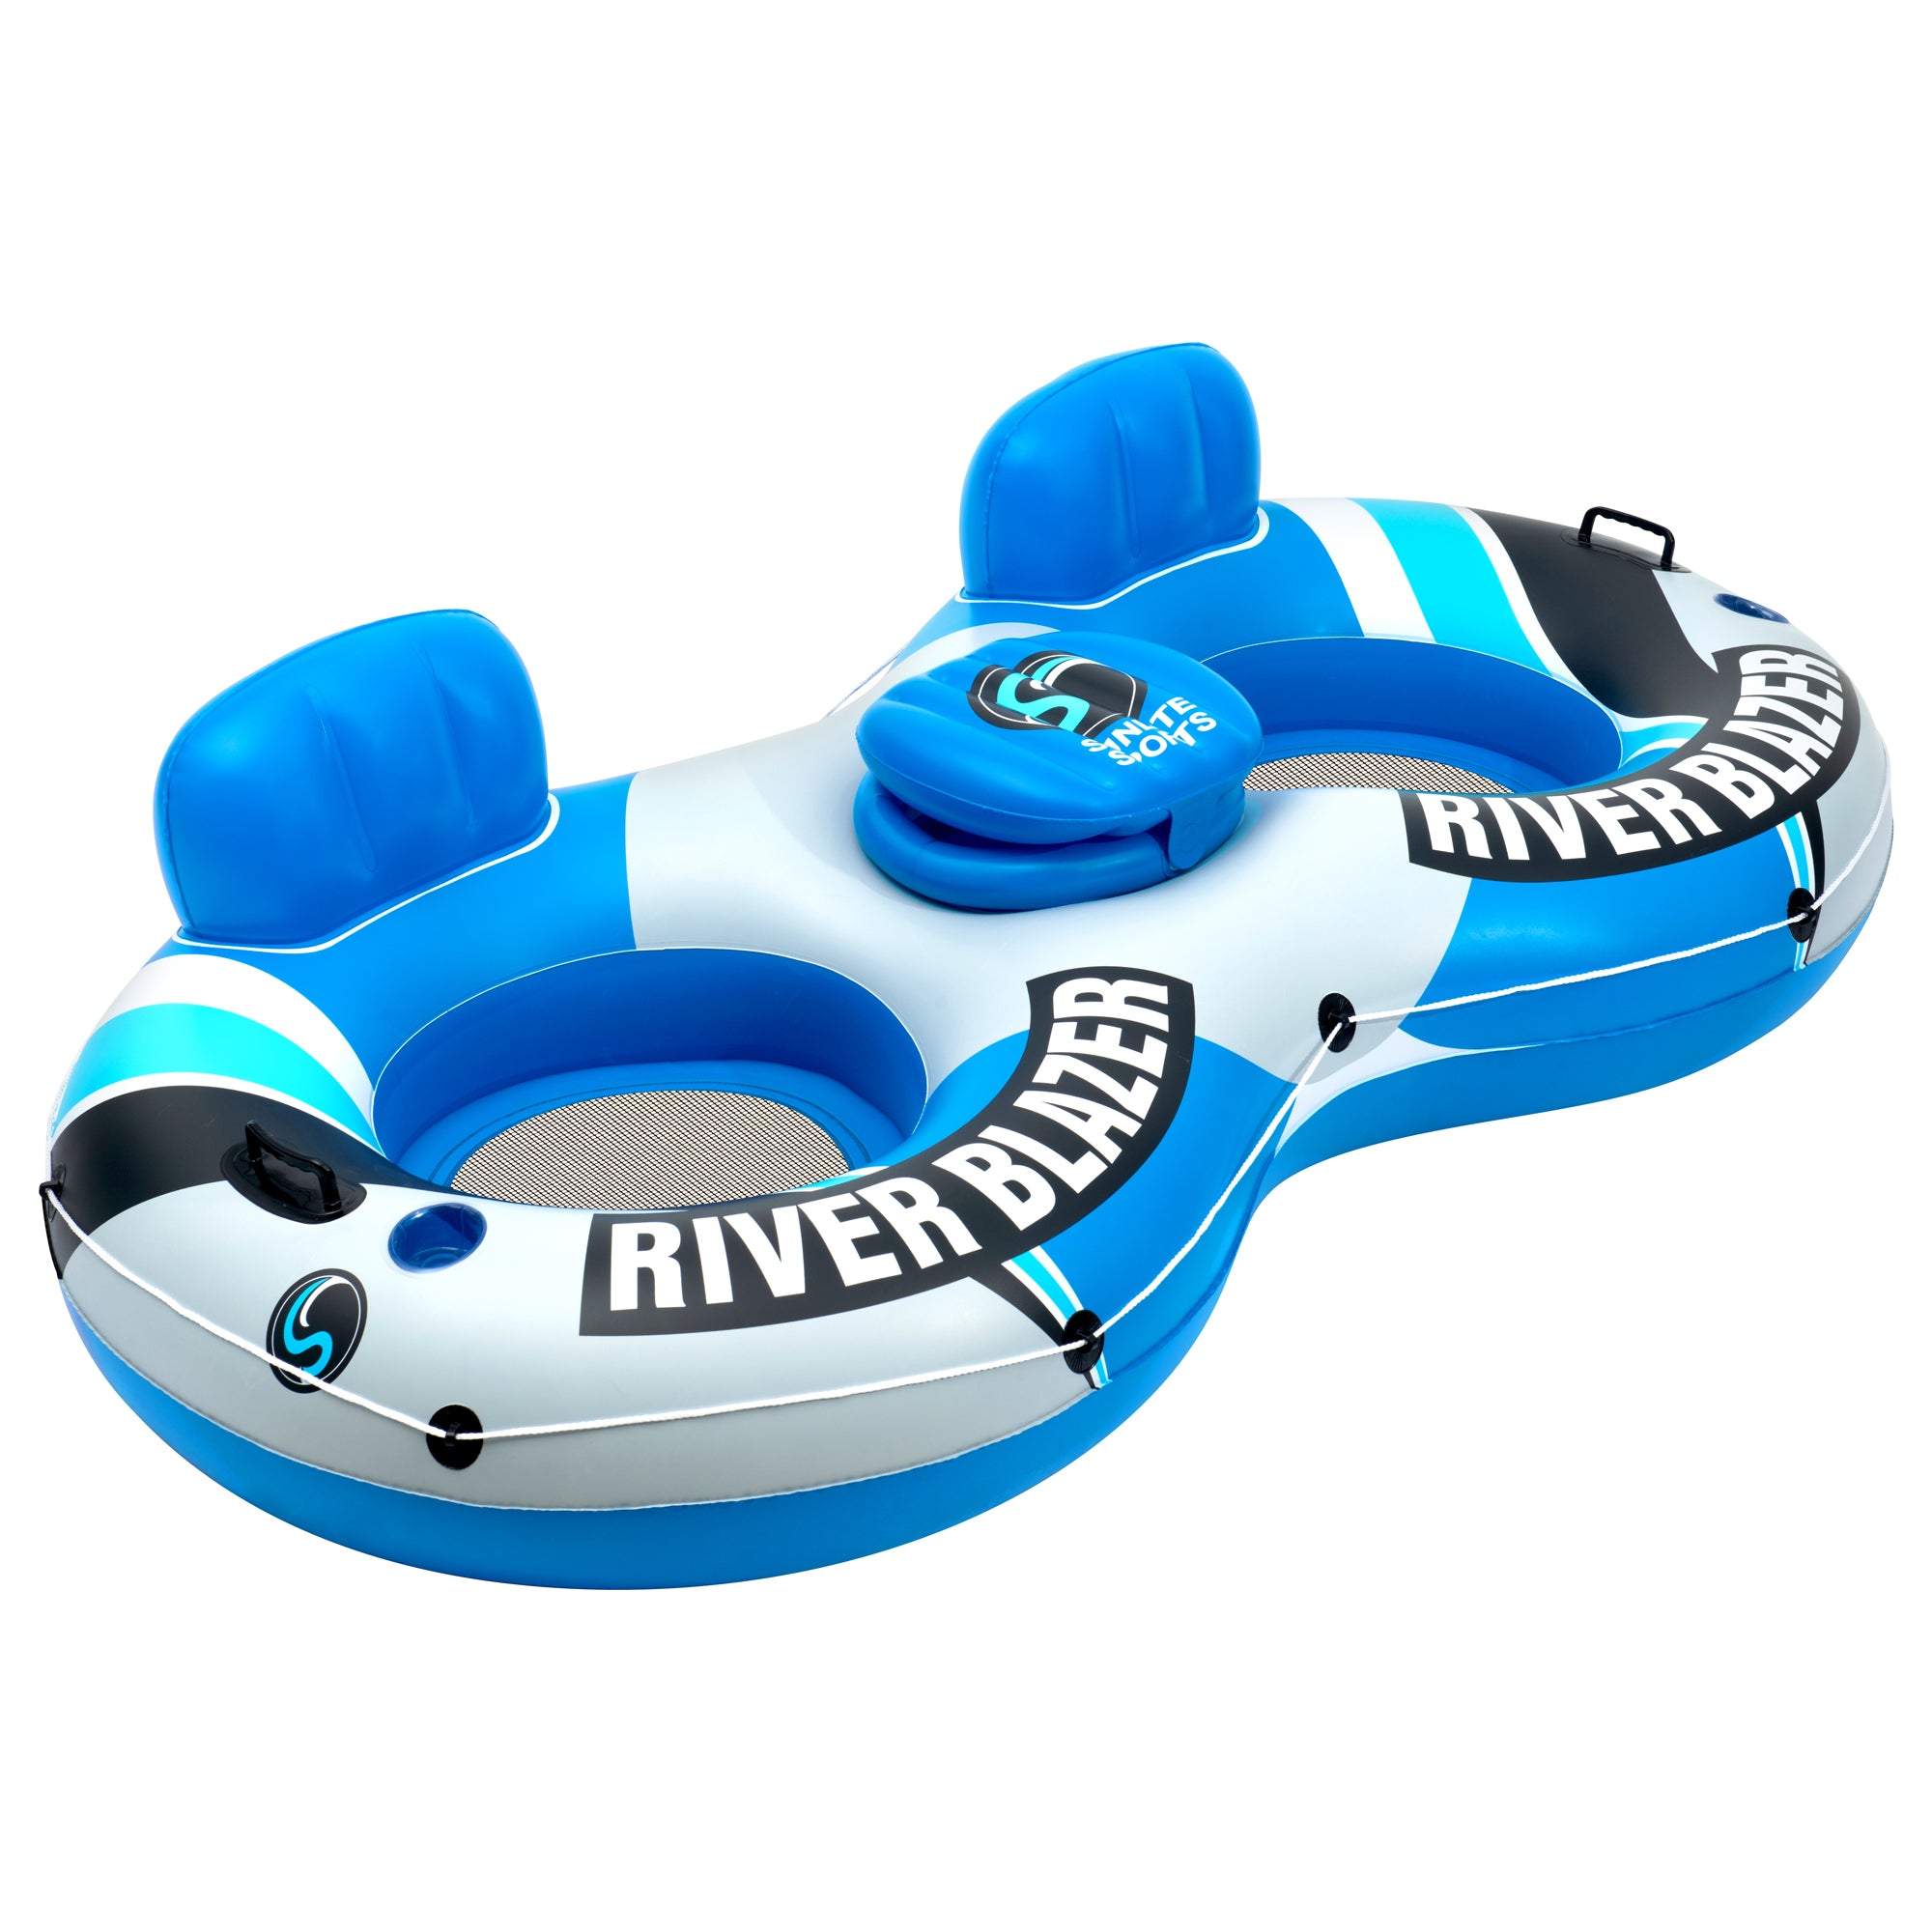 Explore new places with the River Blazer 2-Person Inflatable Kayak